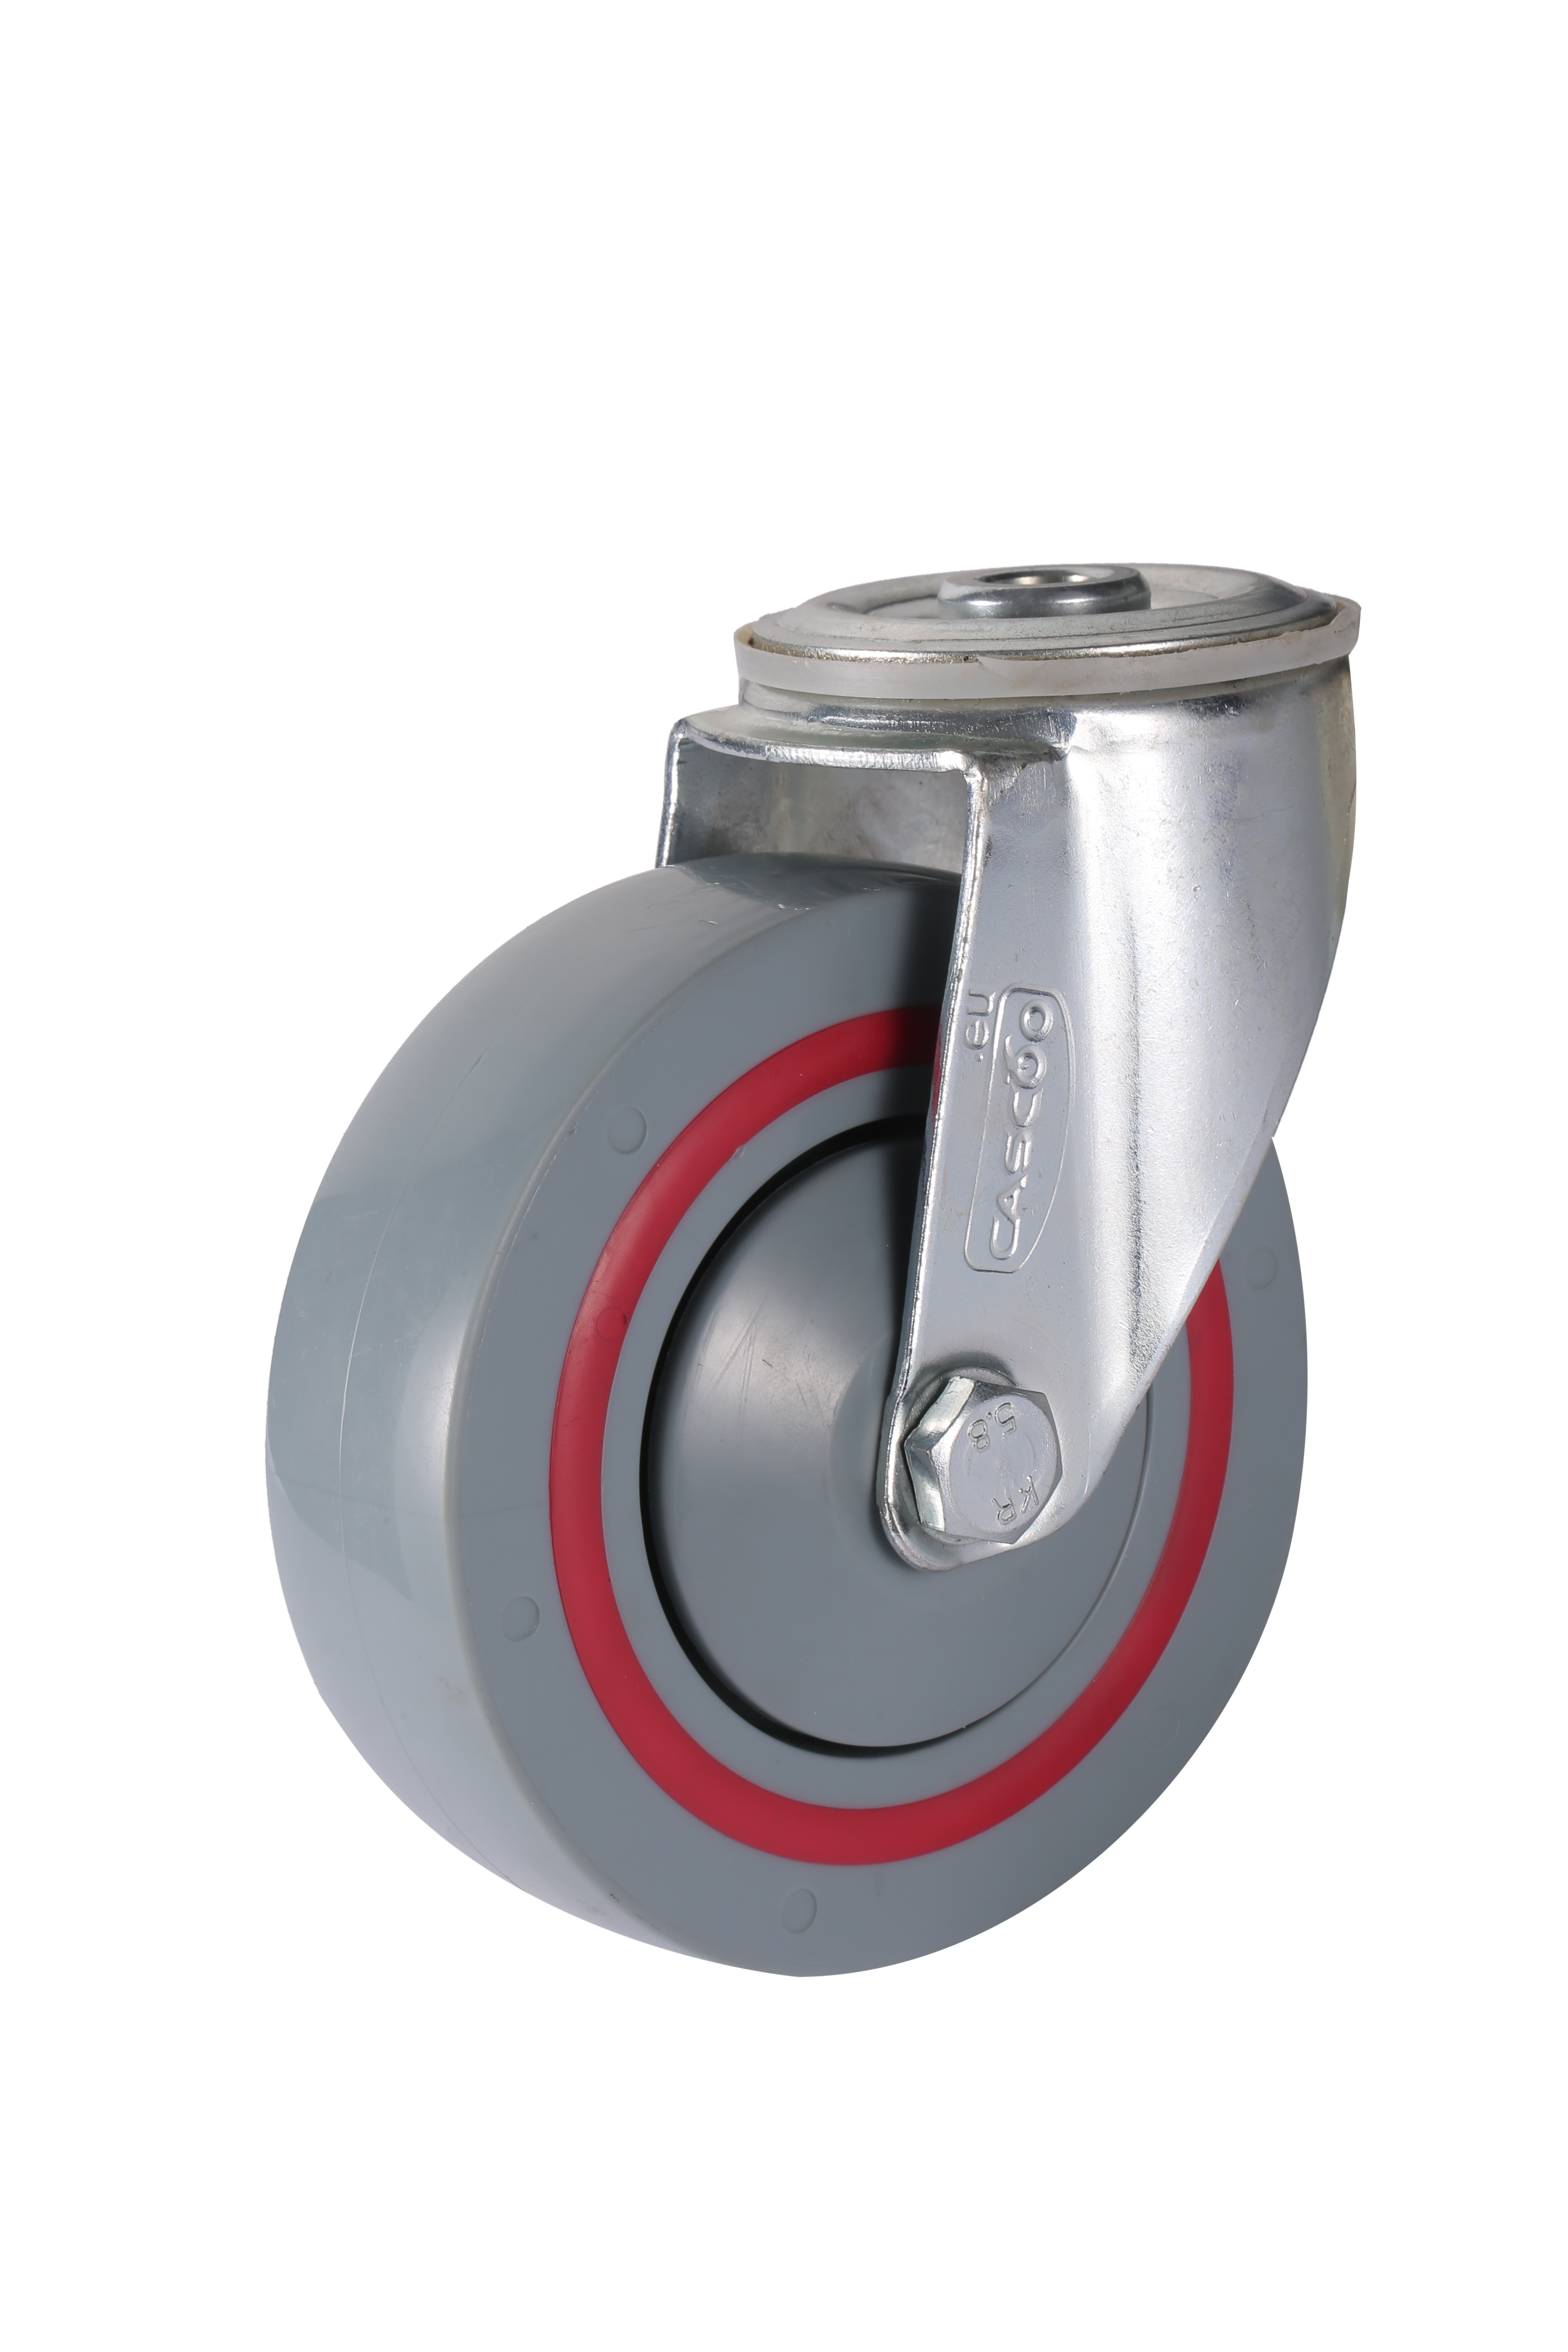 medium duty sandwich top hole universal industrial container wheel casters 